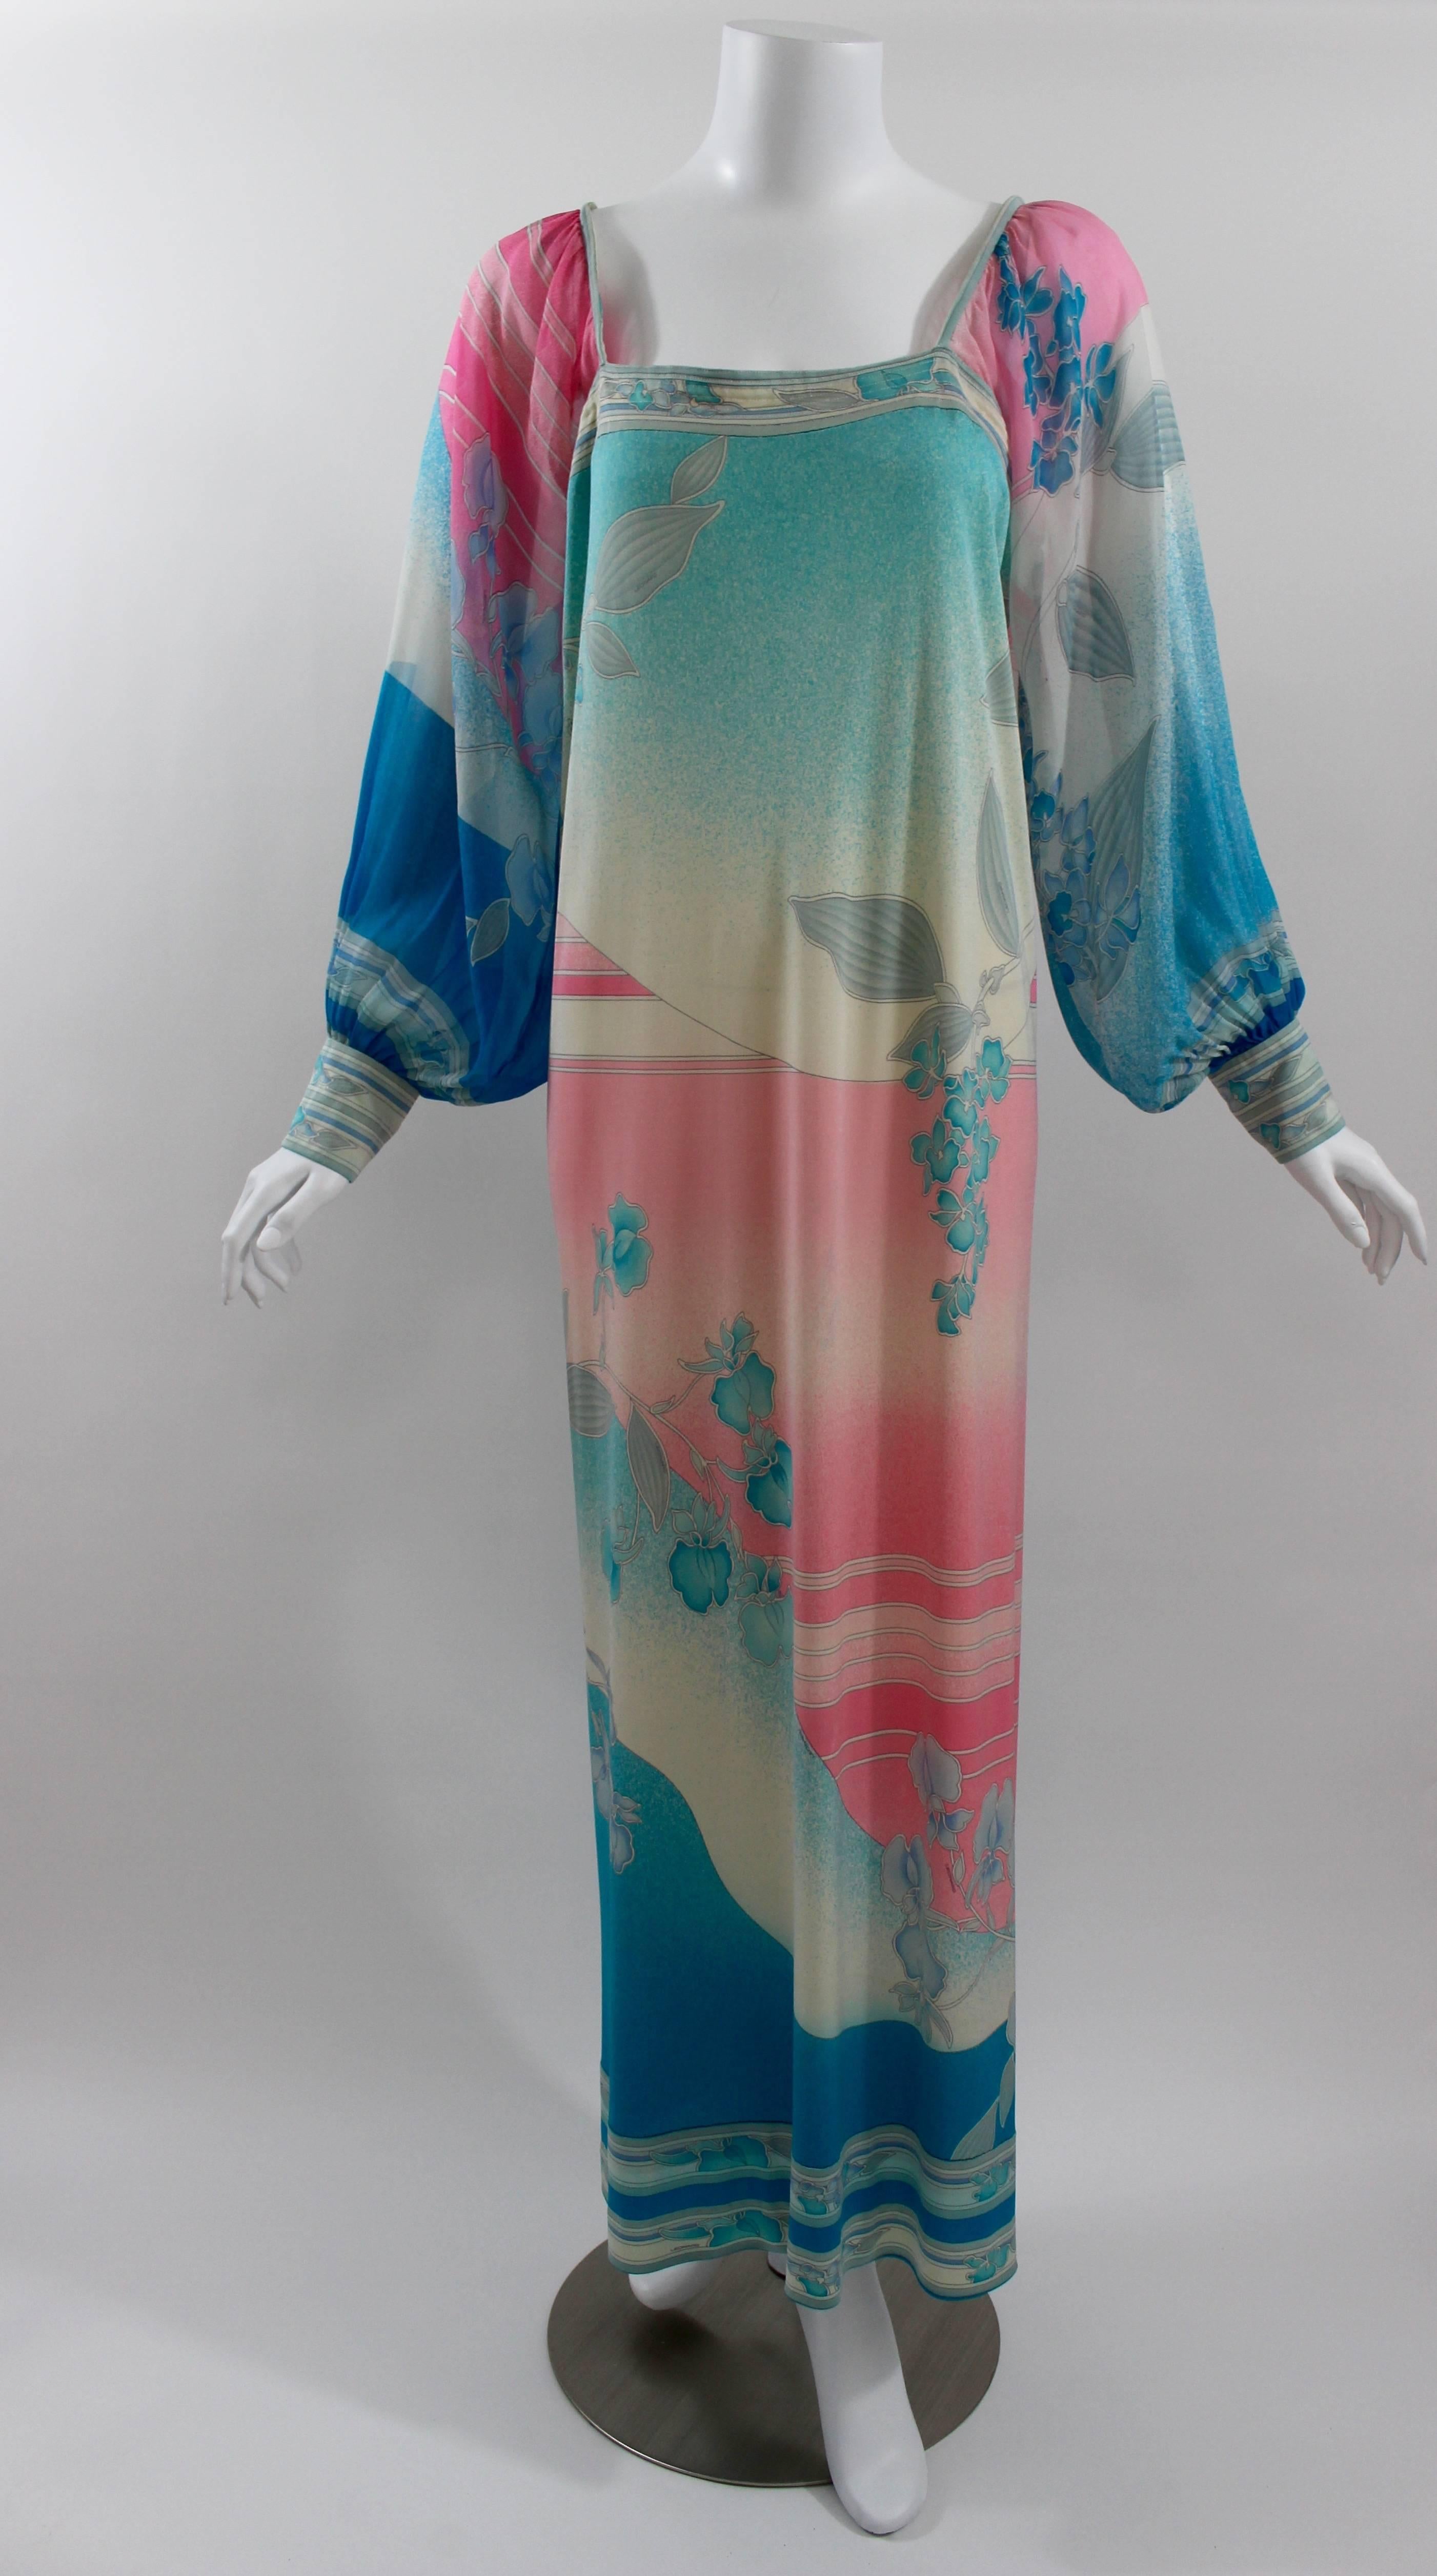 A beautiful Leonard Paris dress from the early 1970s.
The body is a luxurious silk jersey, and the full billowy sleeves in sheer silk chiffon with jersey buttoned cuffs. 
A square neckline front and back.
Slips over the head and unlined. 

This